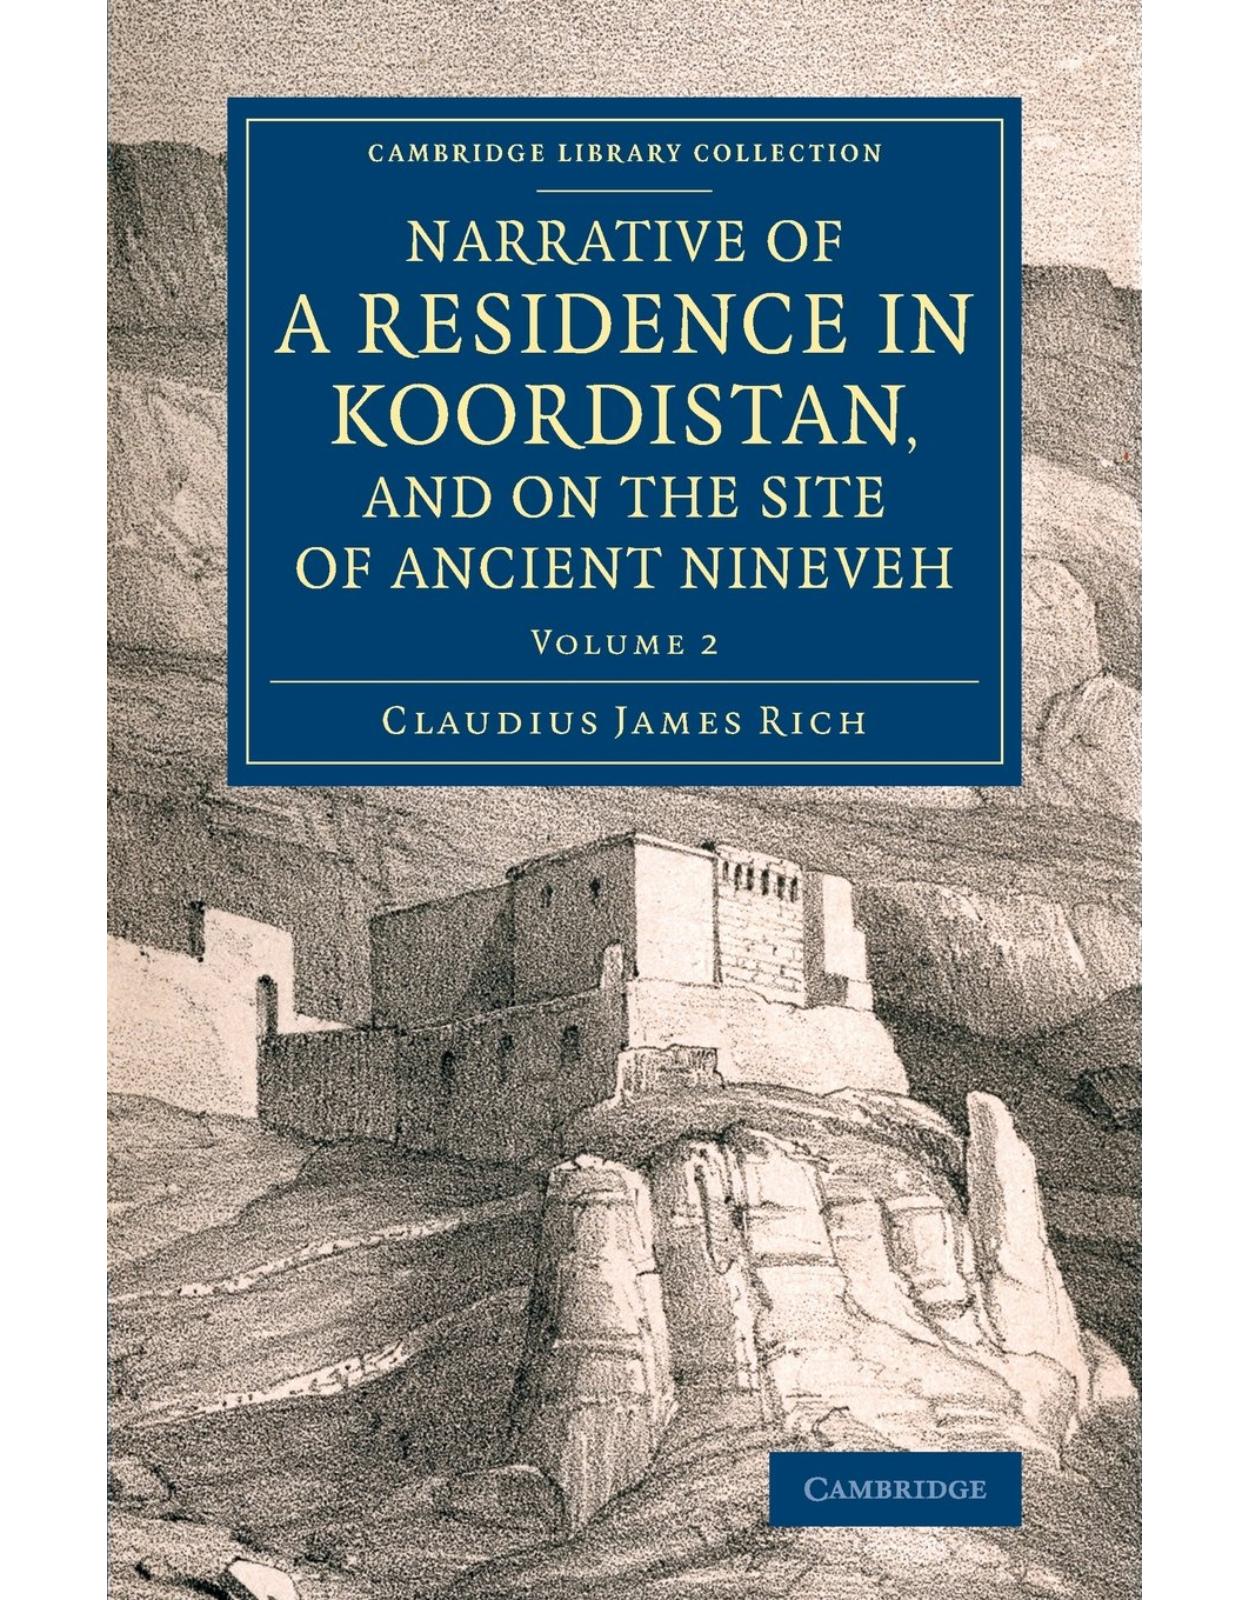 Narrative of a Residence in Koordistan, and on the Site of Ancient Nineveh 2 Volume set: Narrative of a Residence in Koordistan, and on the Site of ... (Cambridge Library Collection - Archaeology)